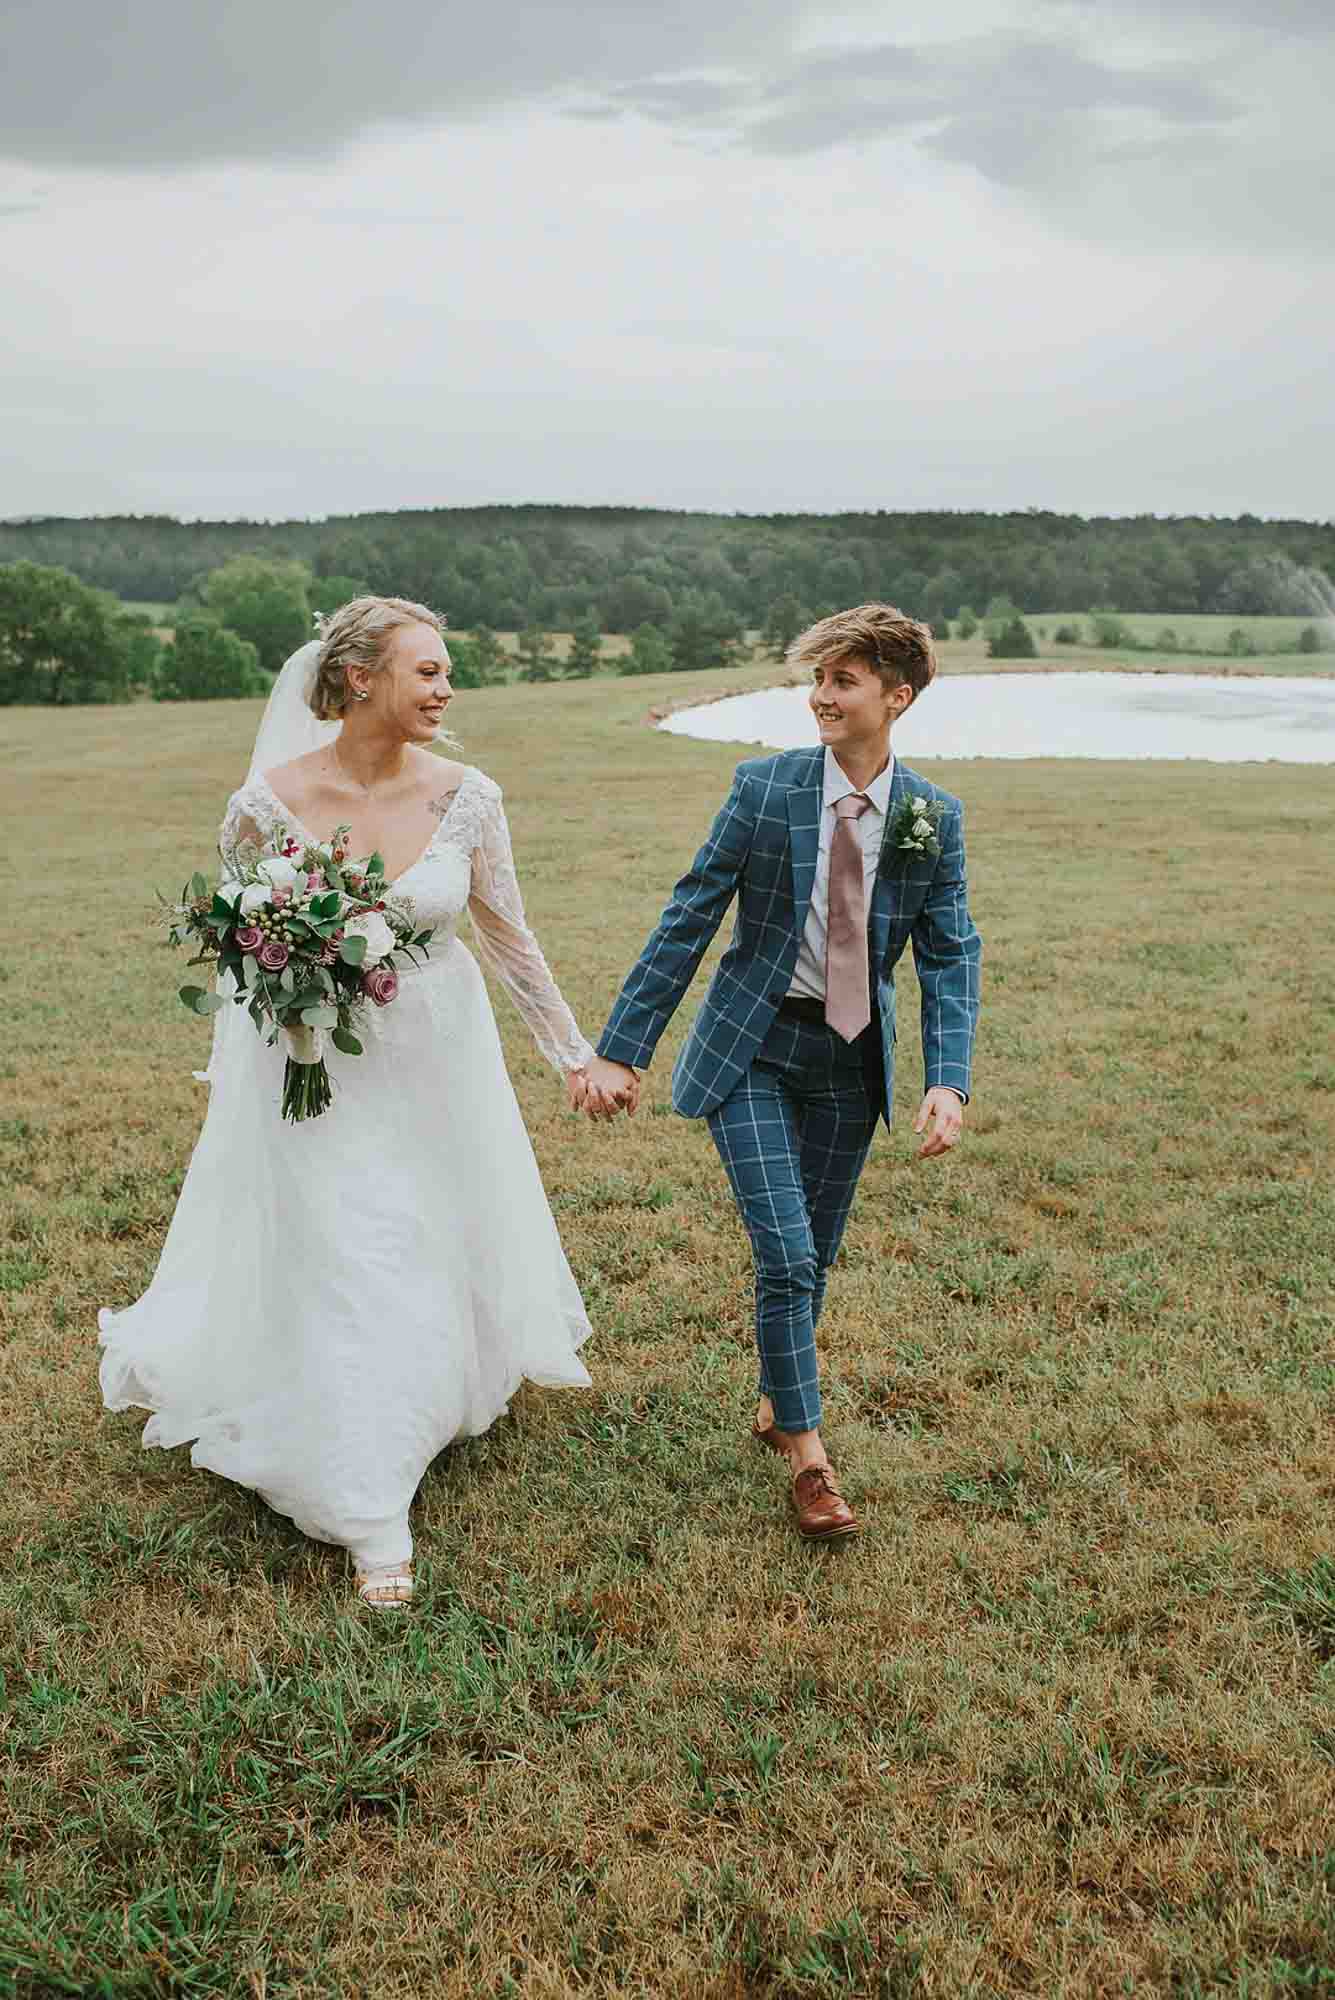 Waterside Georgia farm wedding with pink floral cake | Starglass Photography | Featured on Equally Wed, the leading LGBTQ+ wedding magazine